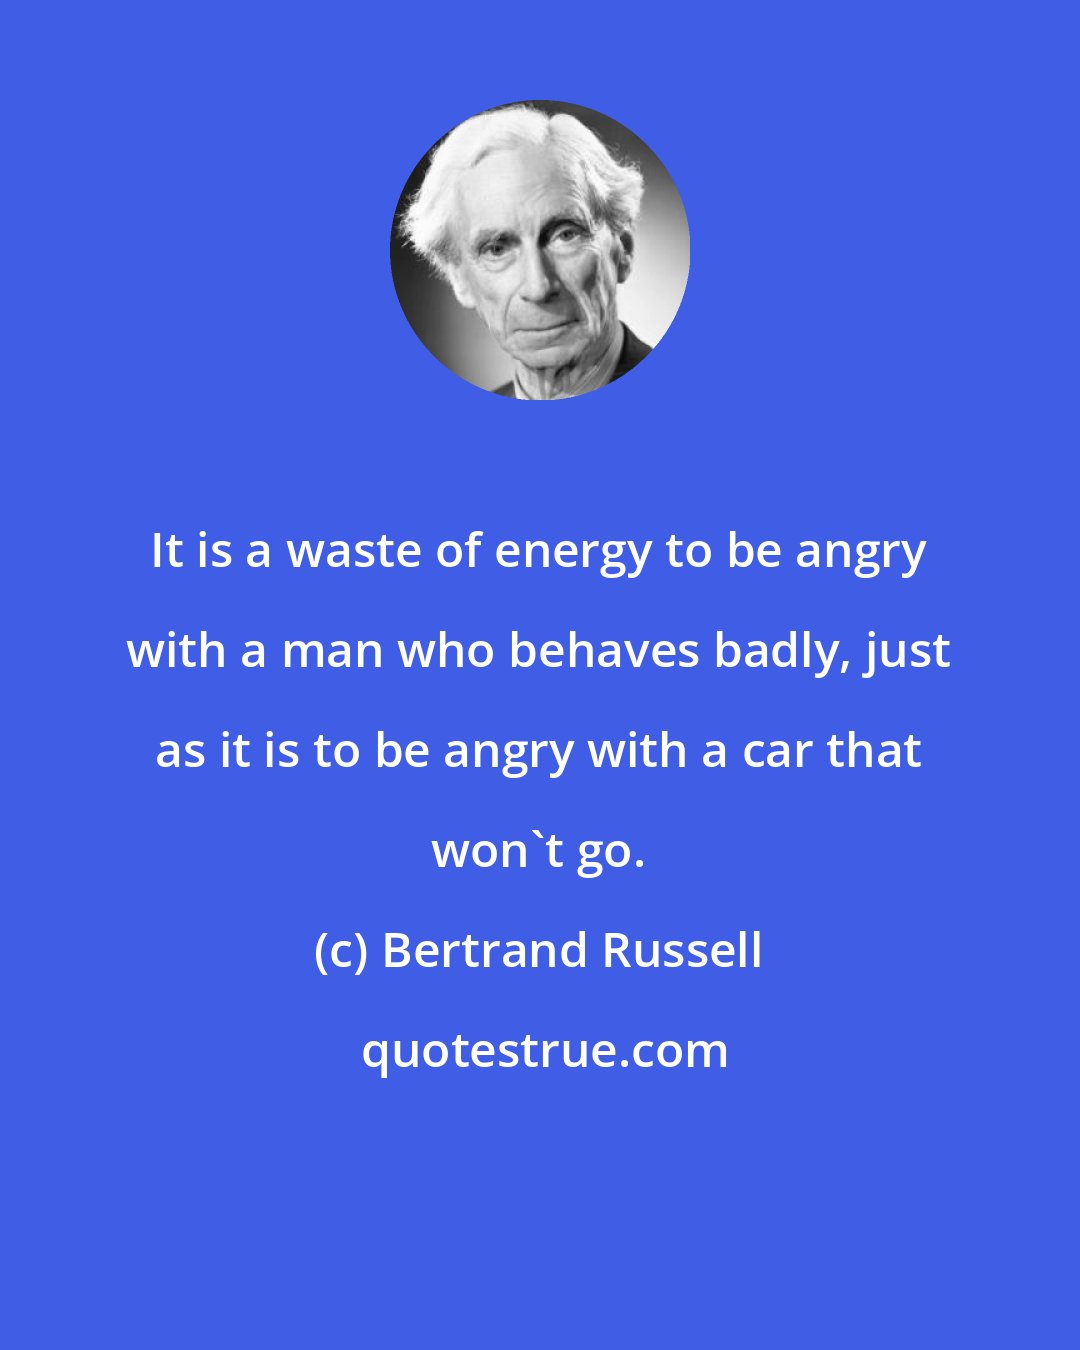 Bertrand Russell: It is a waste of energy to be angry with a man who behaves badly, just as it is to be angry with a car that won't go.